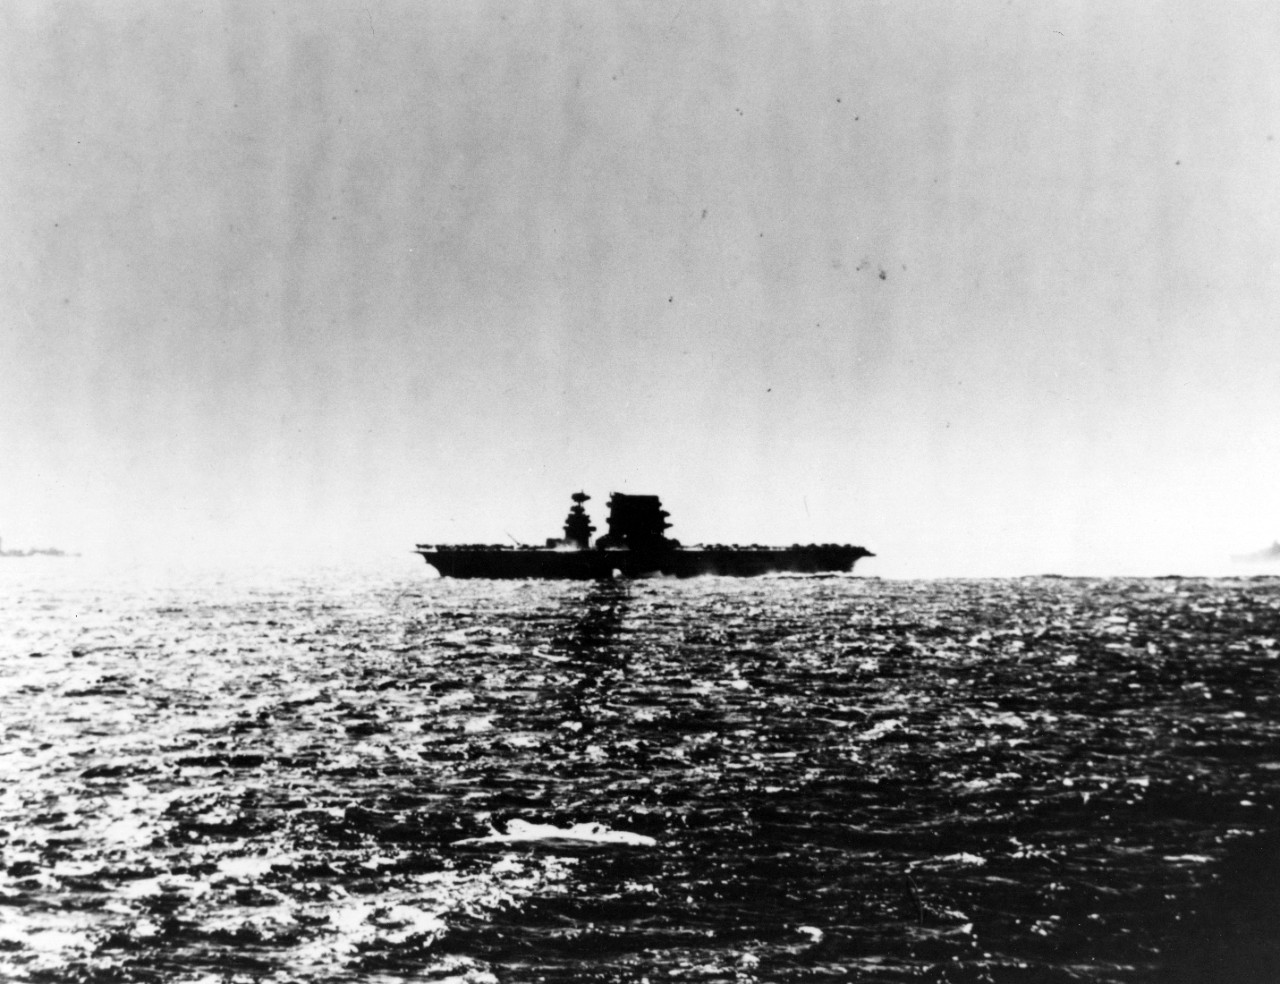 Photo #: 80-G-16568  Battle of the Coral Sea, May 1942